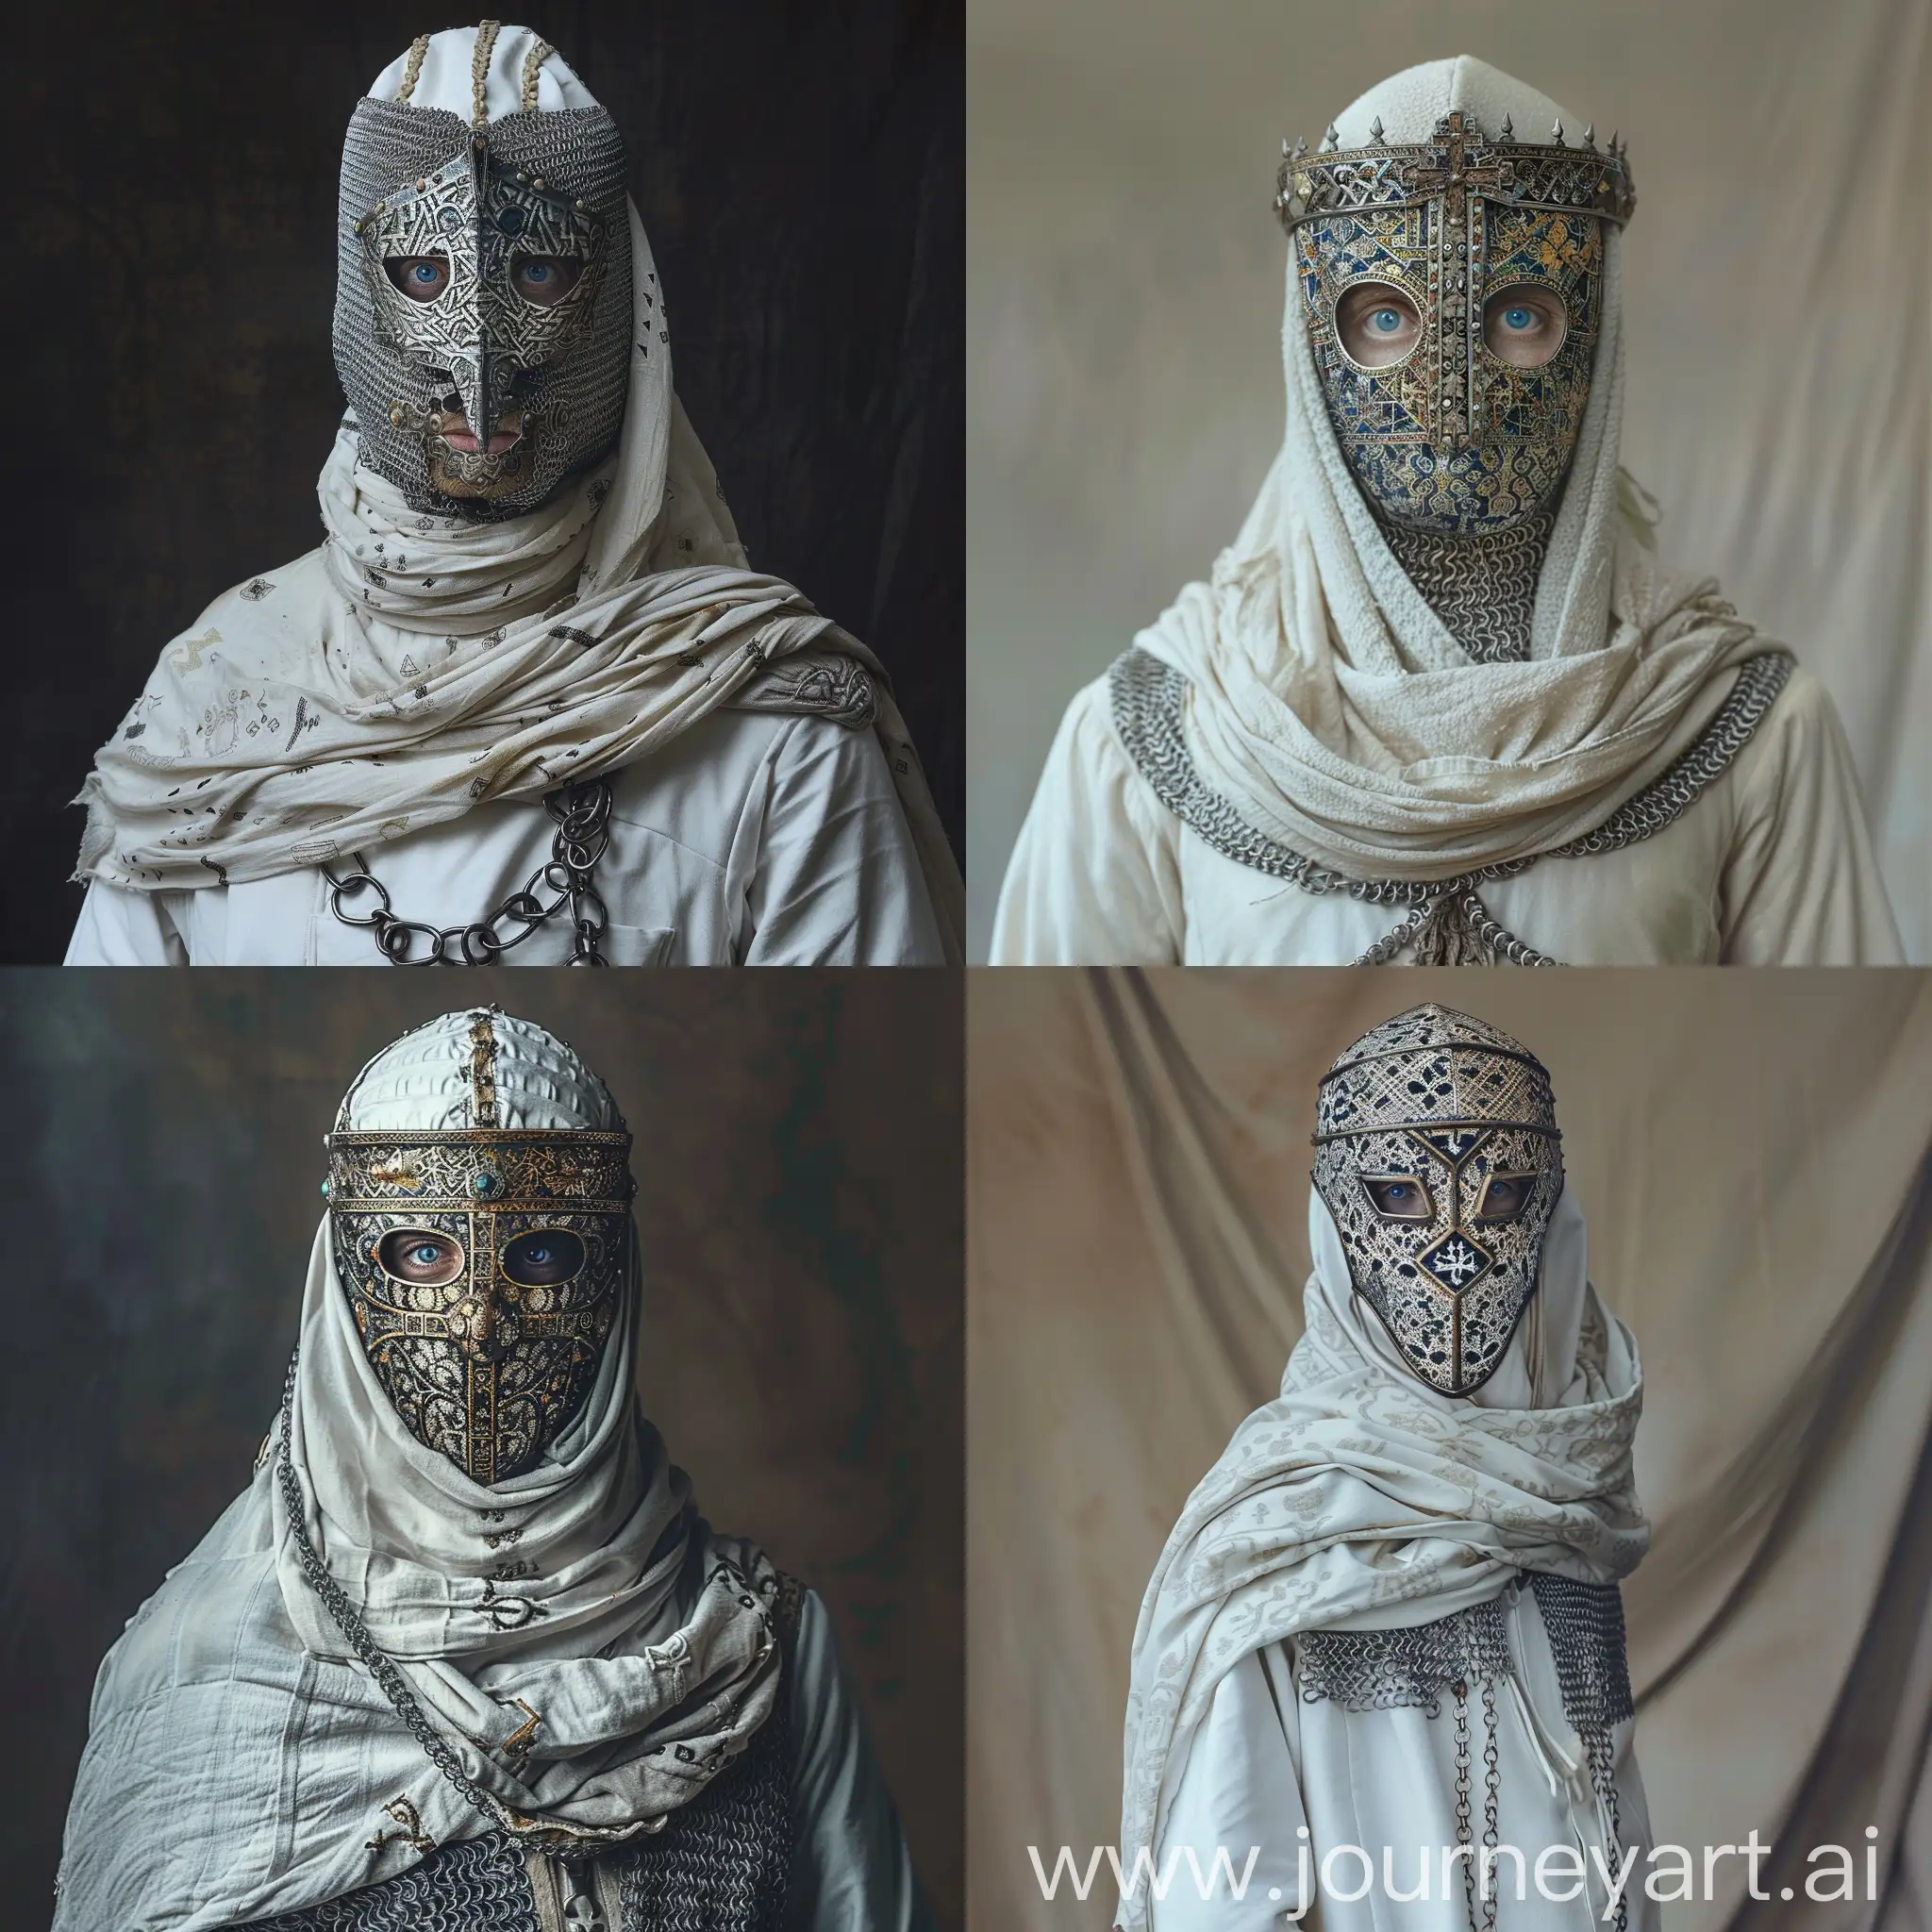 King Baldwin 4, wearing a white uniform covering his entire body, with chain mail on top. On his head is a shawl of cloth as long as his shoulders, on his face is an iron mask with patterns, through which only his blue eyes are visible